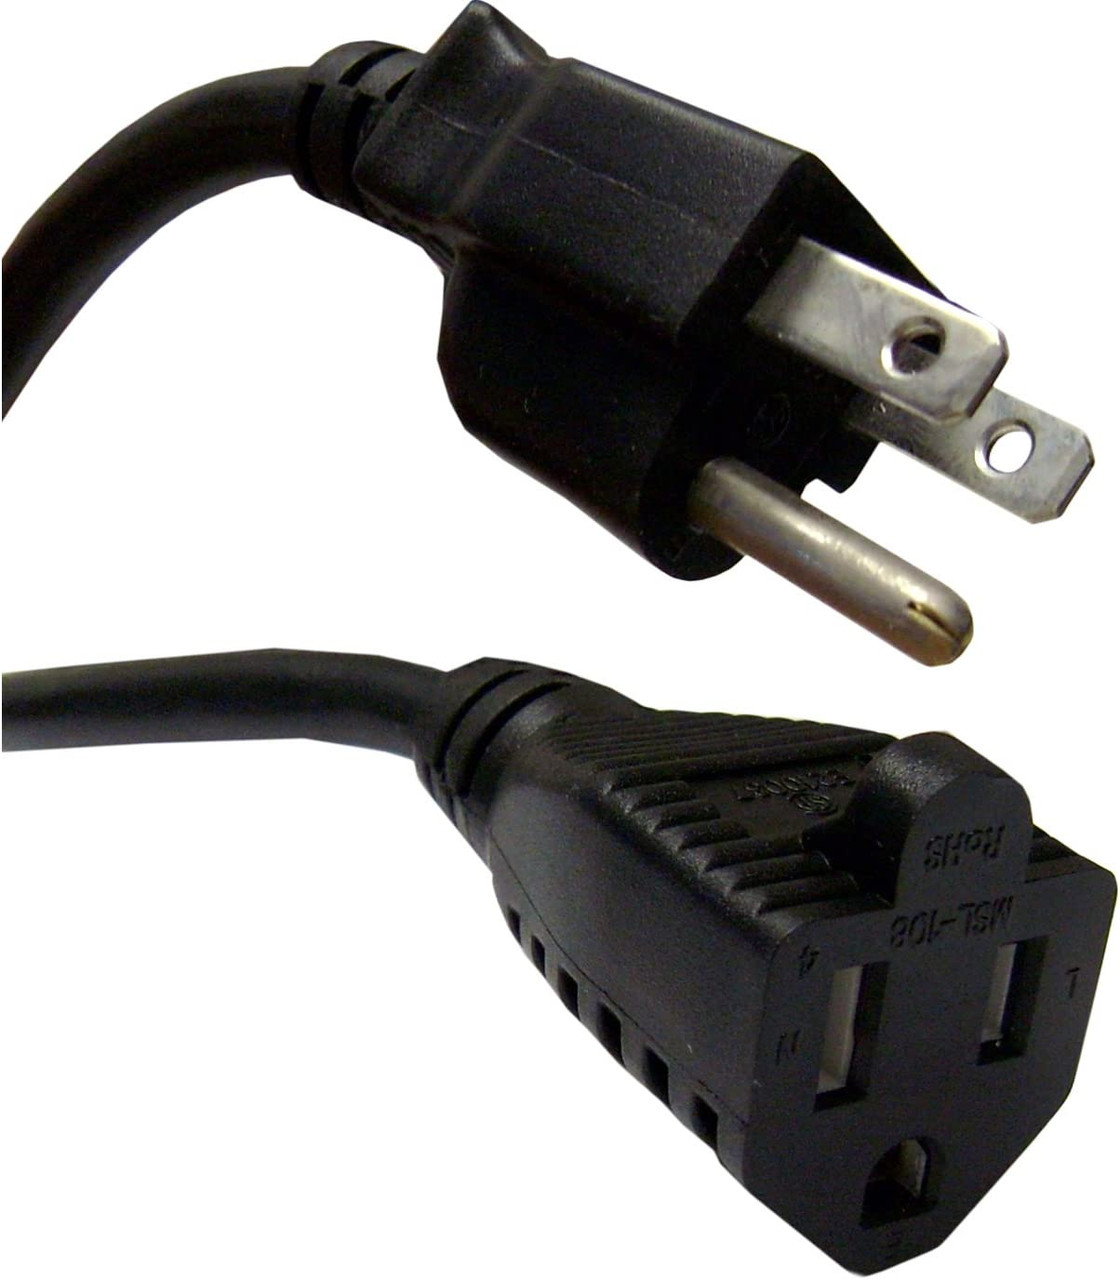 6 feet Heavy Duty Power Extension Cord, Power Extension Cable Black NEMA 5-15P to NEMA 5-15R 13 Amp Power Cable, 16 AWG